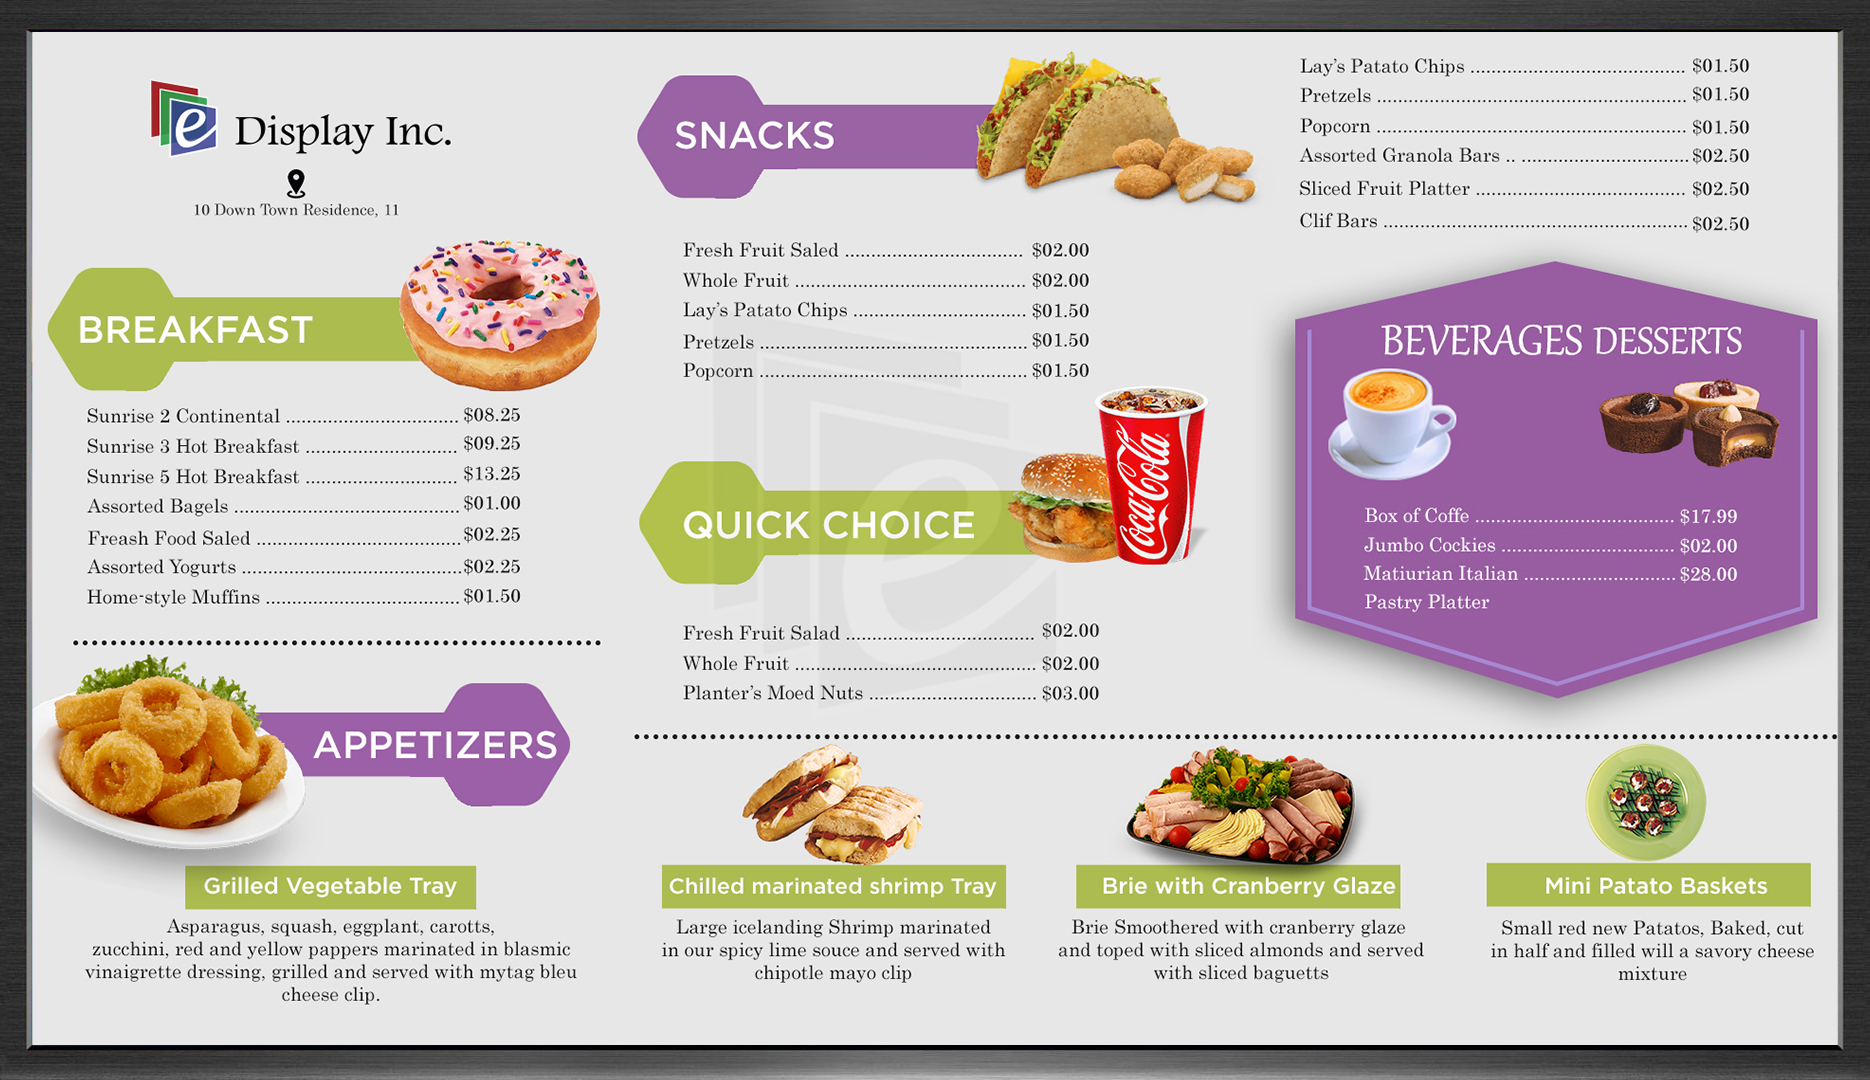 Free Android Digital Signage for restaurants, healthcare, hotels, retail